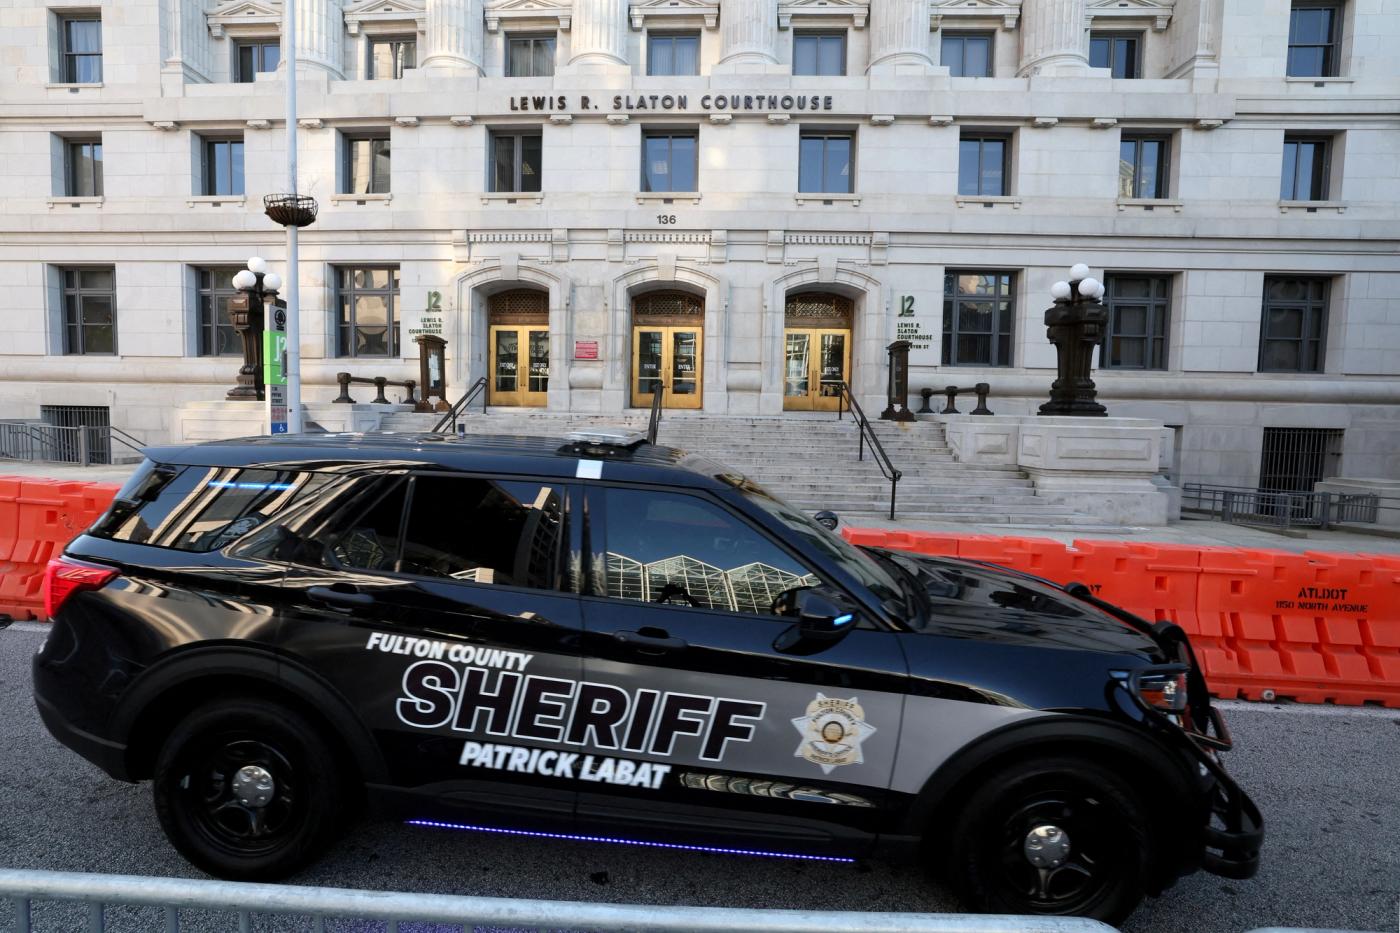 A sheriff's vehicle passes by the Lewis R. Slaton Courthouse and Superior Court of Fulton County.